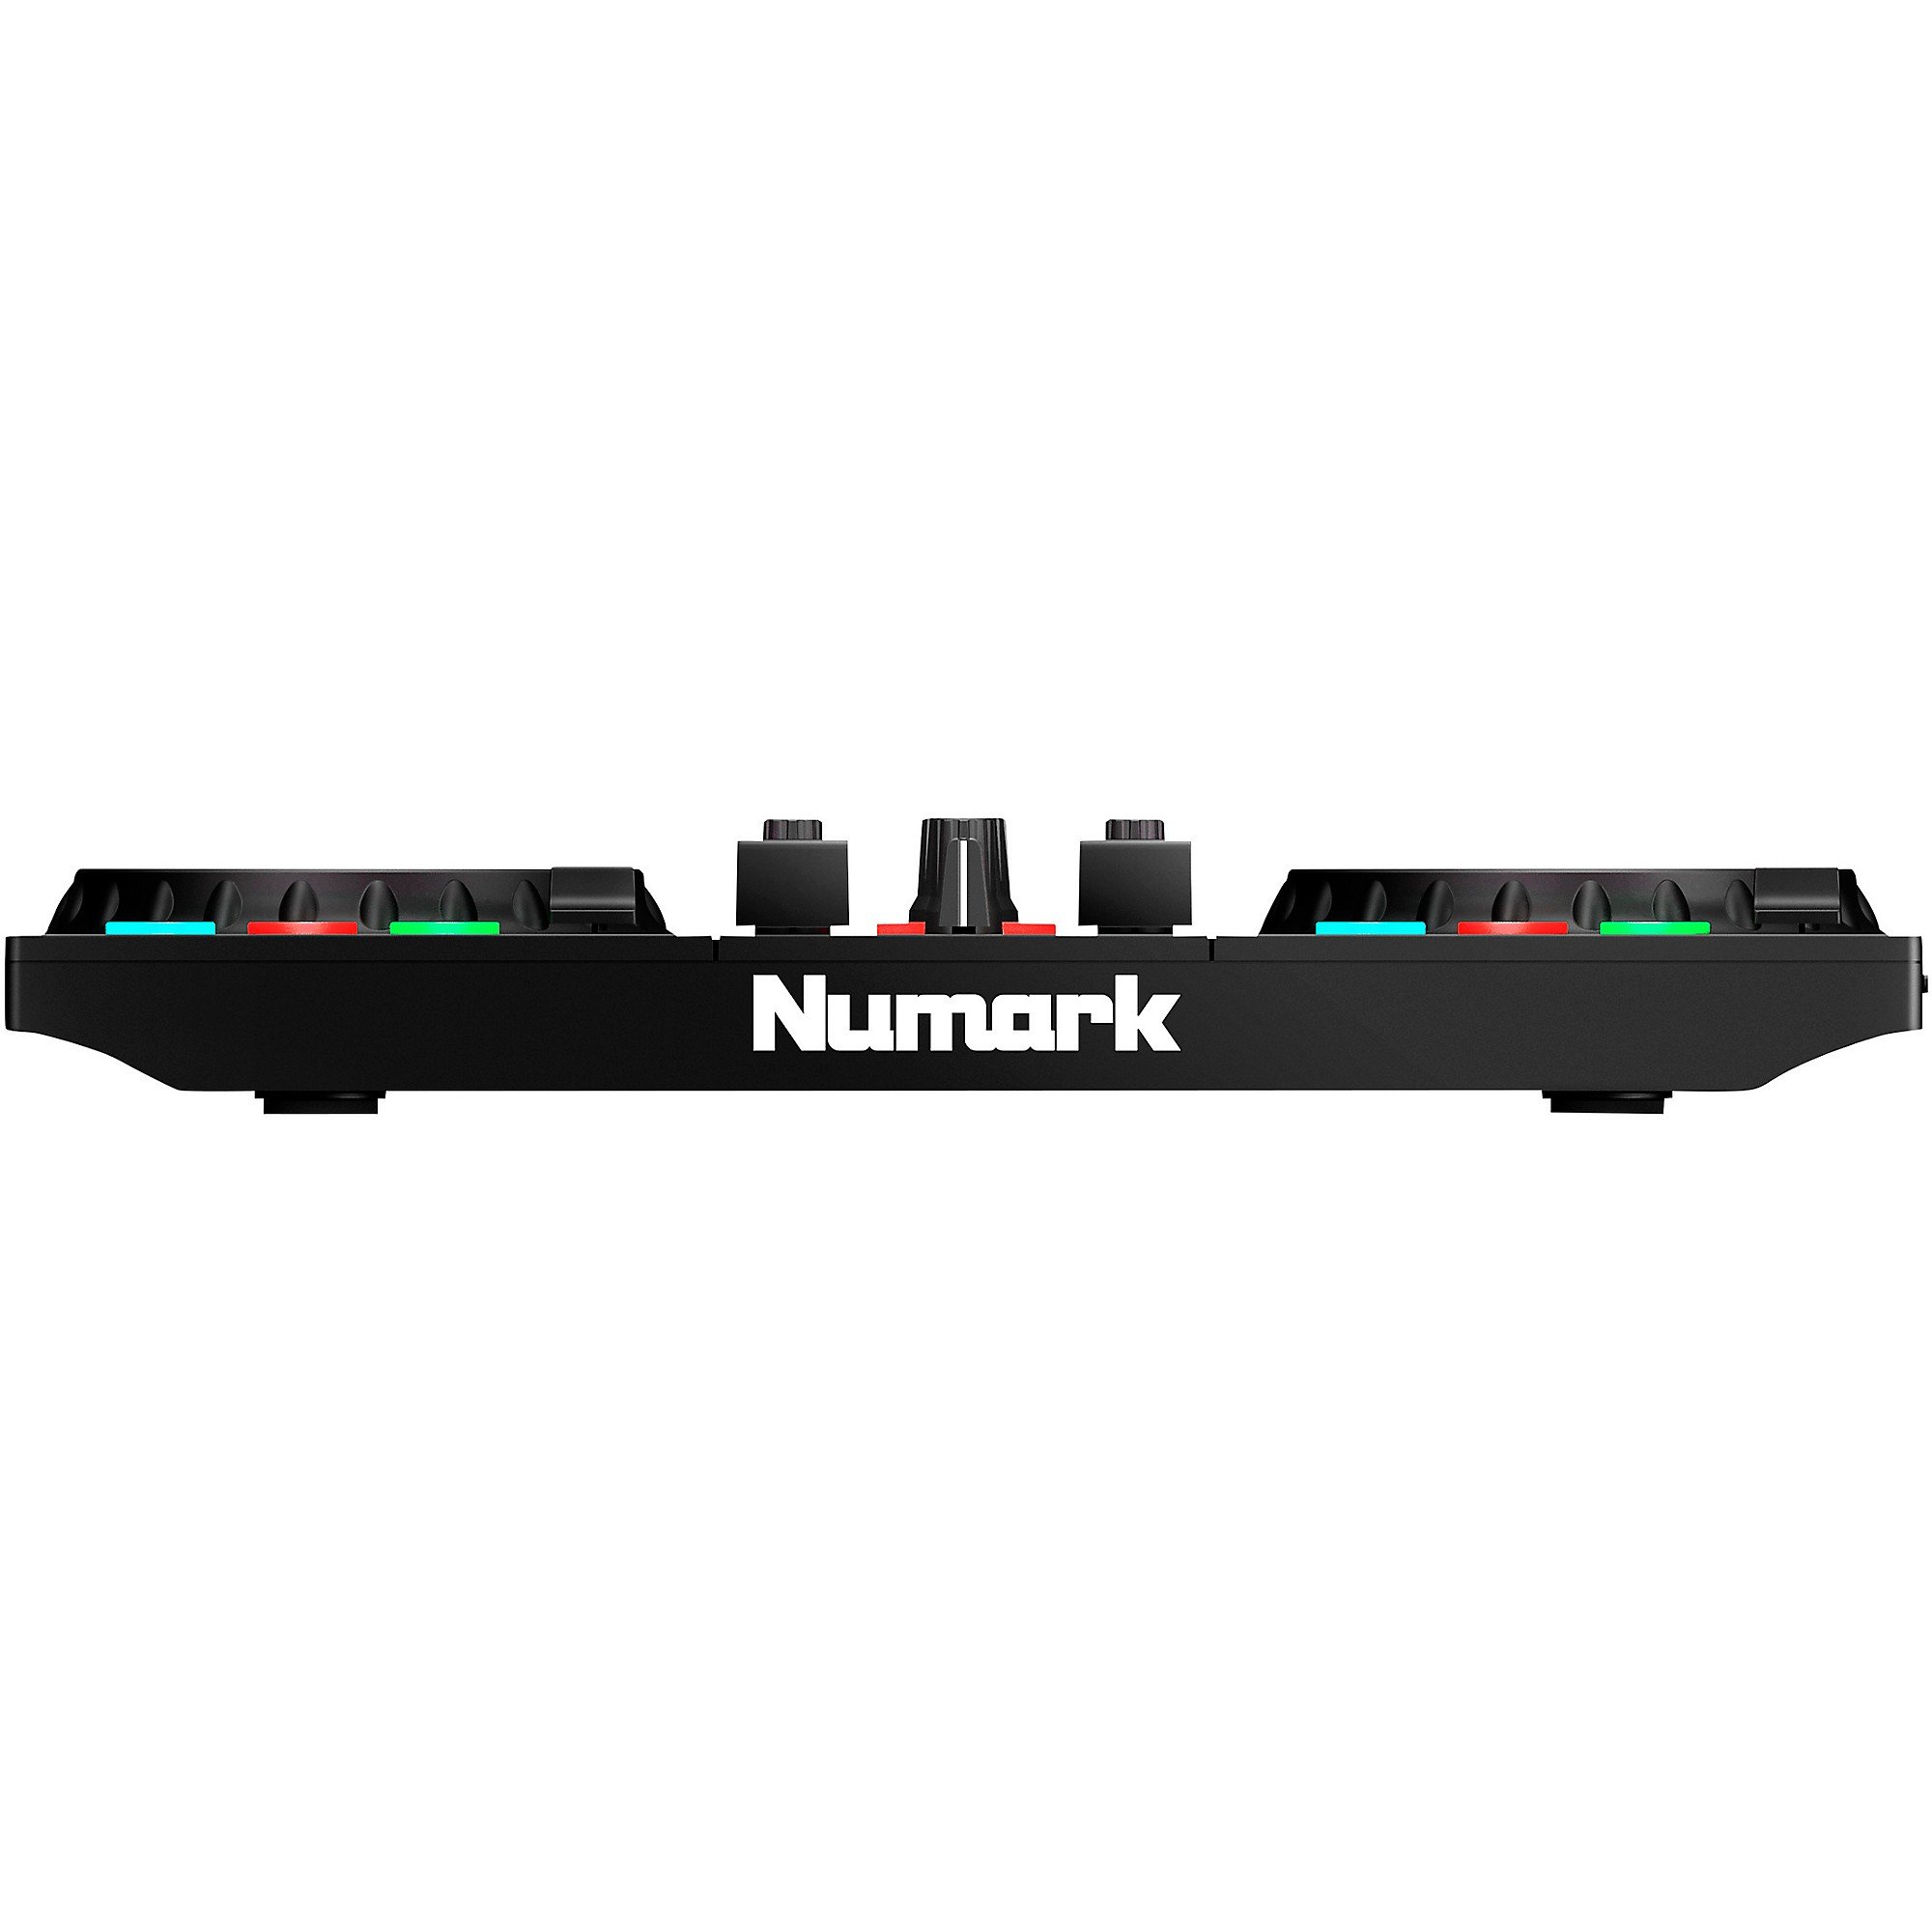 Numark Beginners Party Mix II - DJ Controller Set with Built-In Lights, Mixer for Serato Lite and Algoriddim Pro AI - image 4 of 8